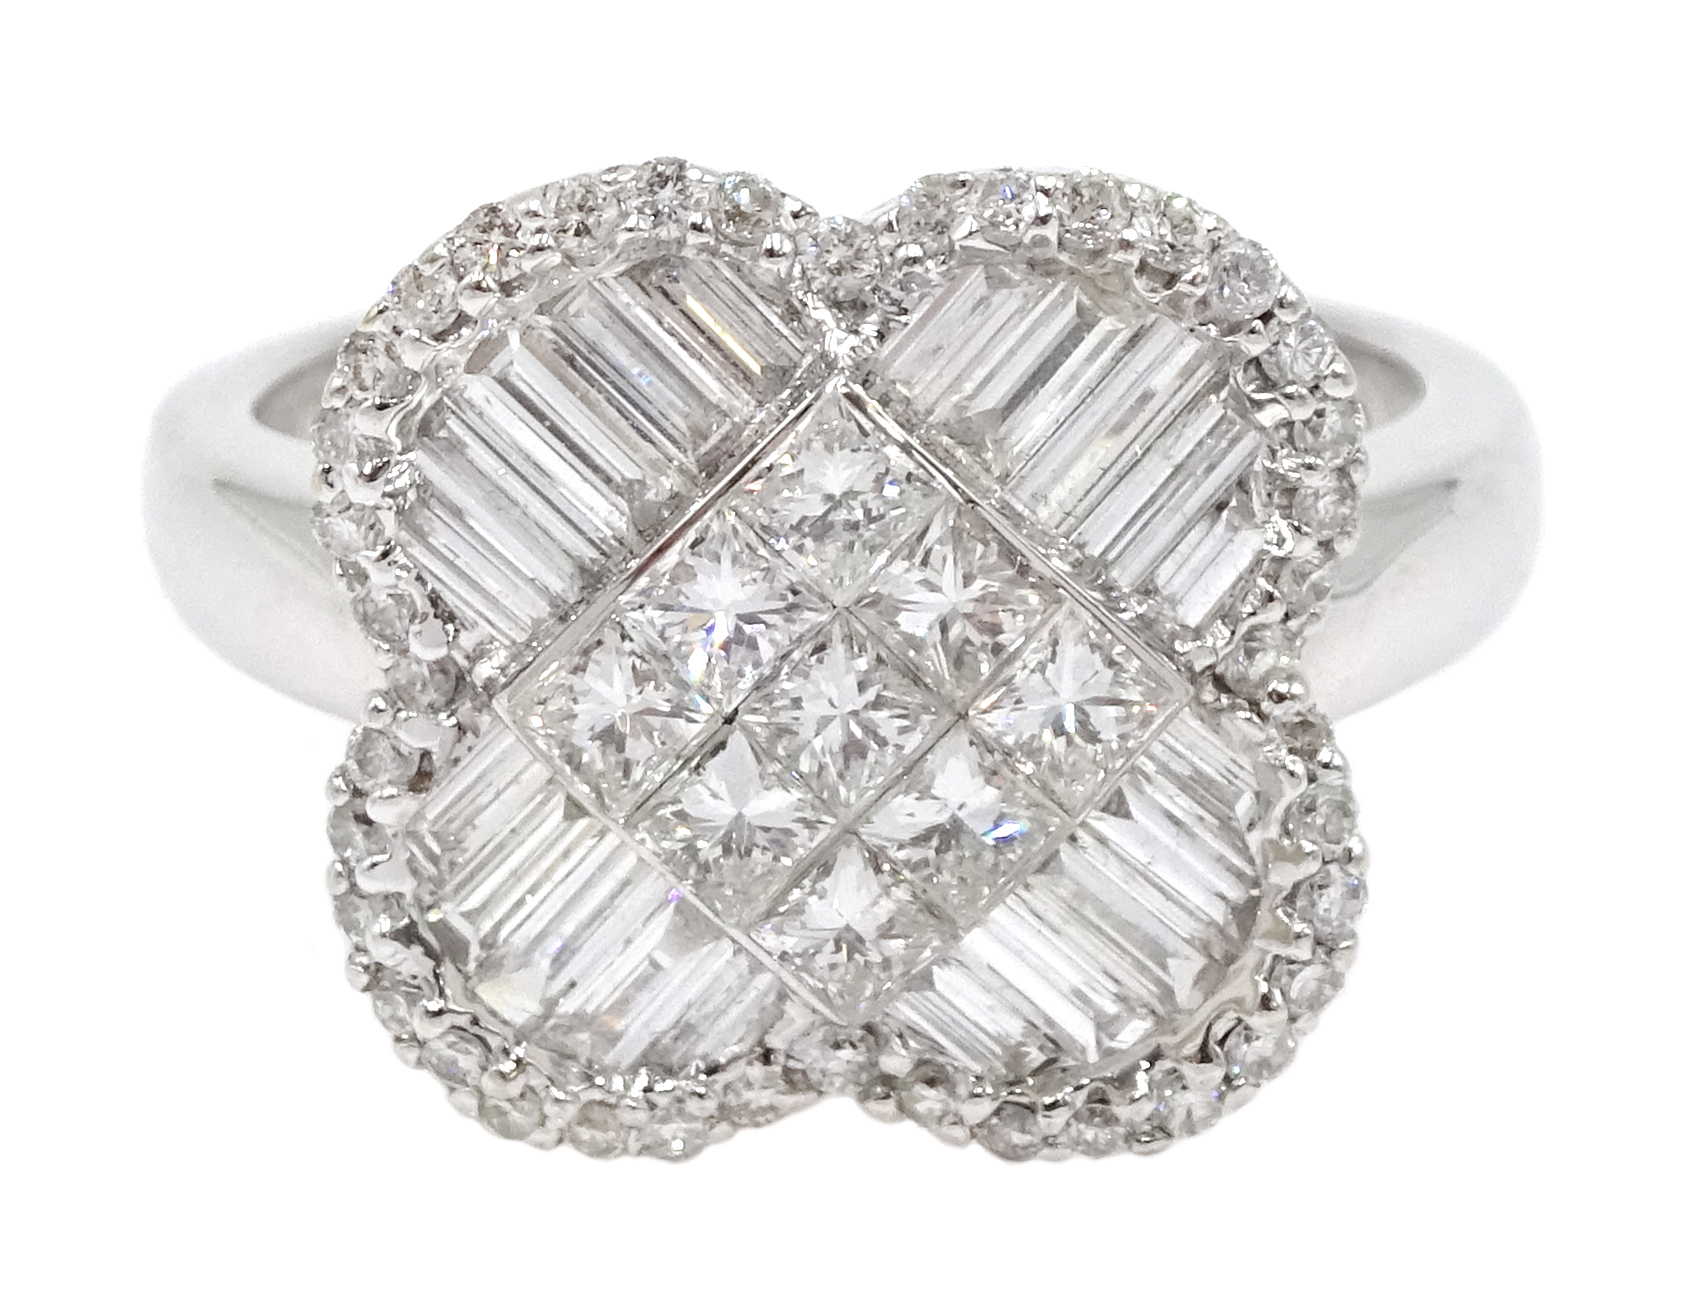 18ct white gold and diamond cluster ring, diamond total weight approx 1.25 carat